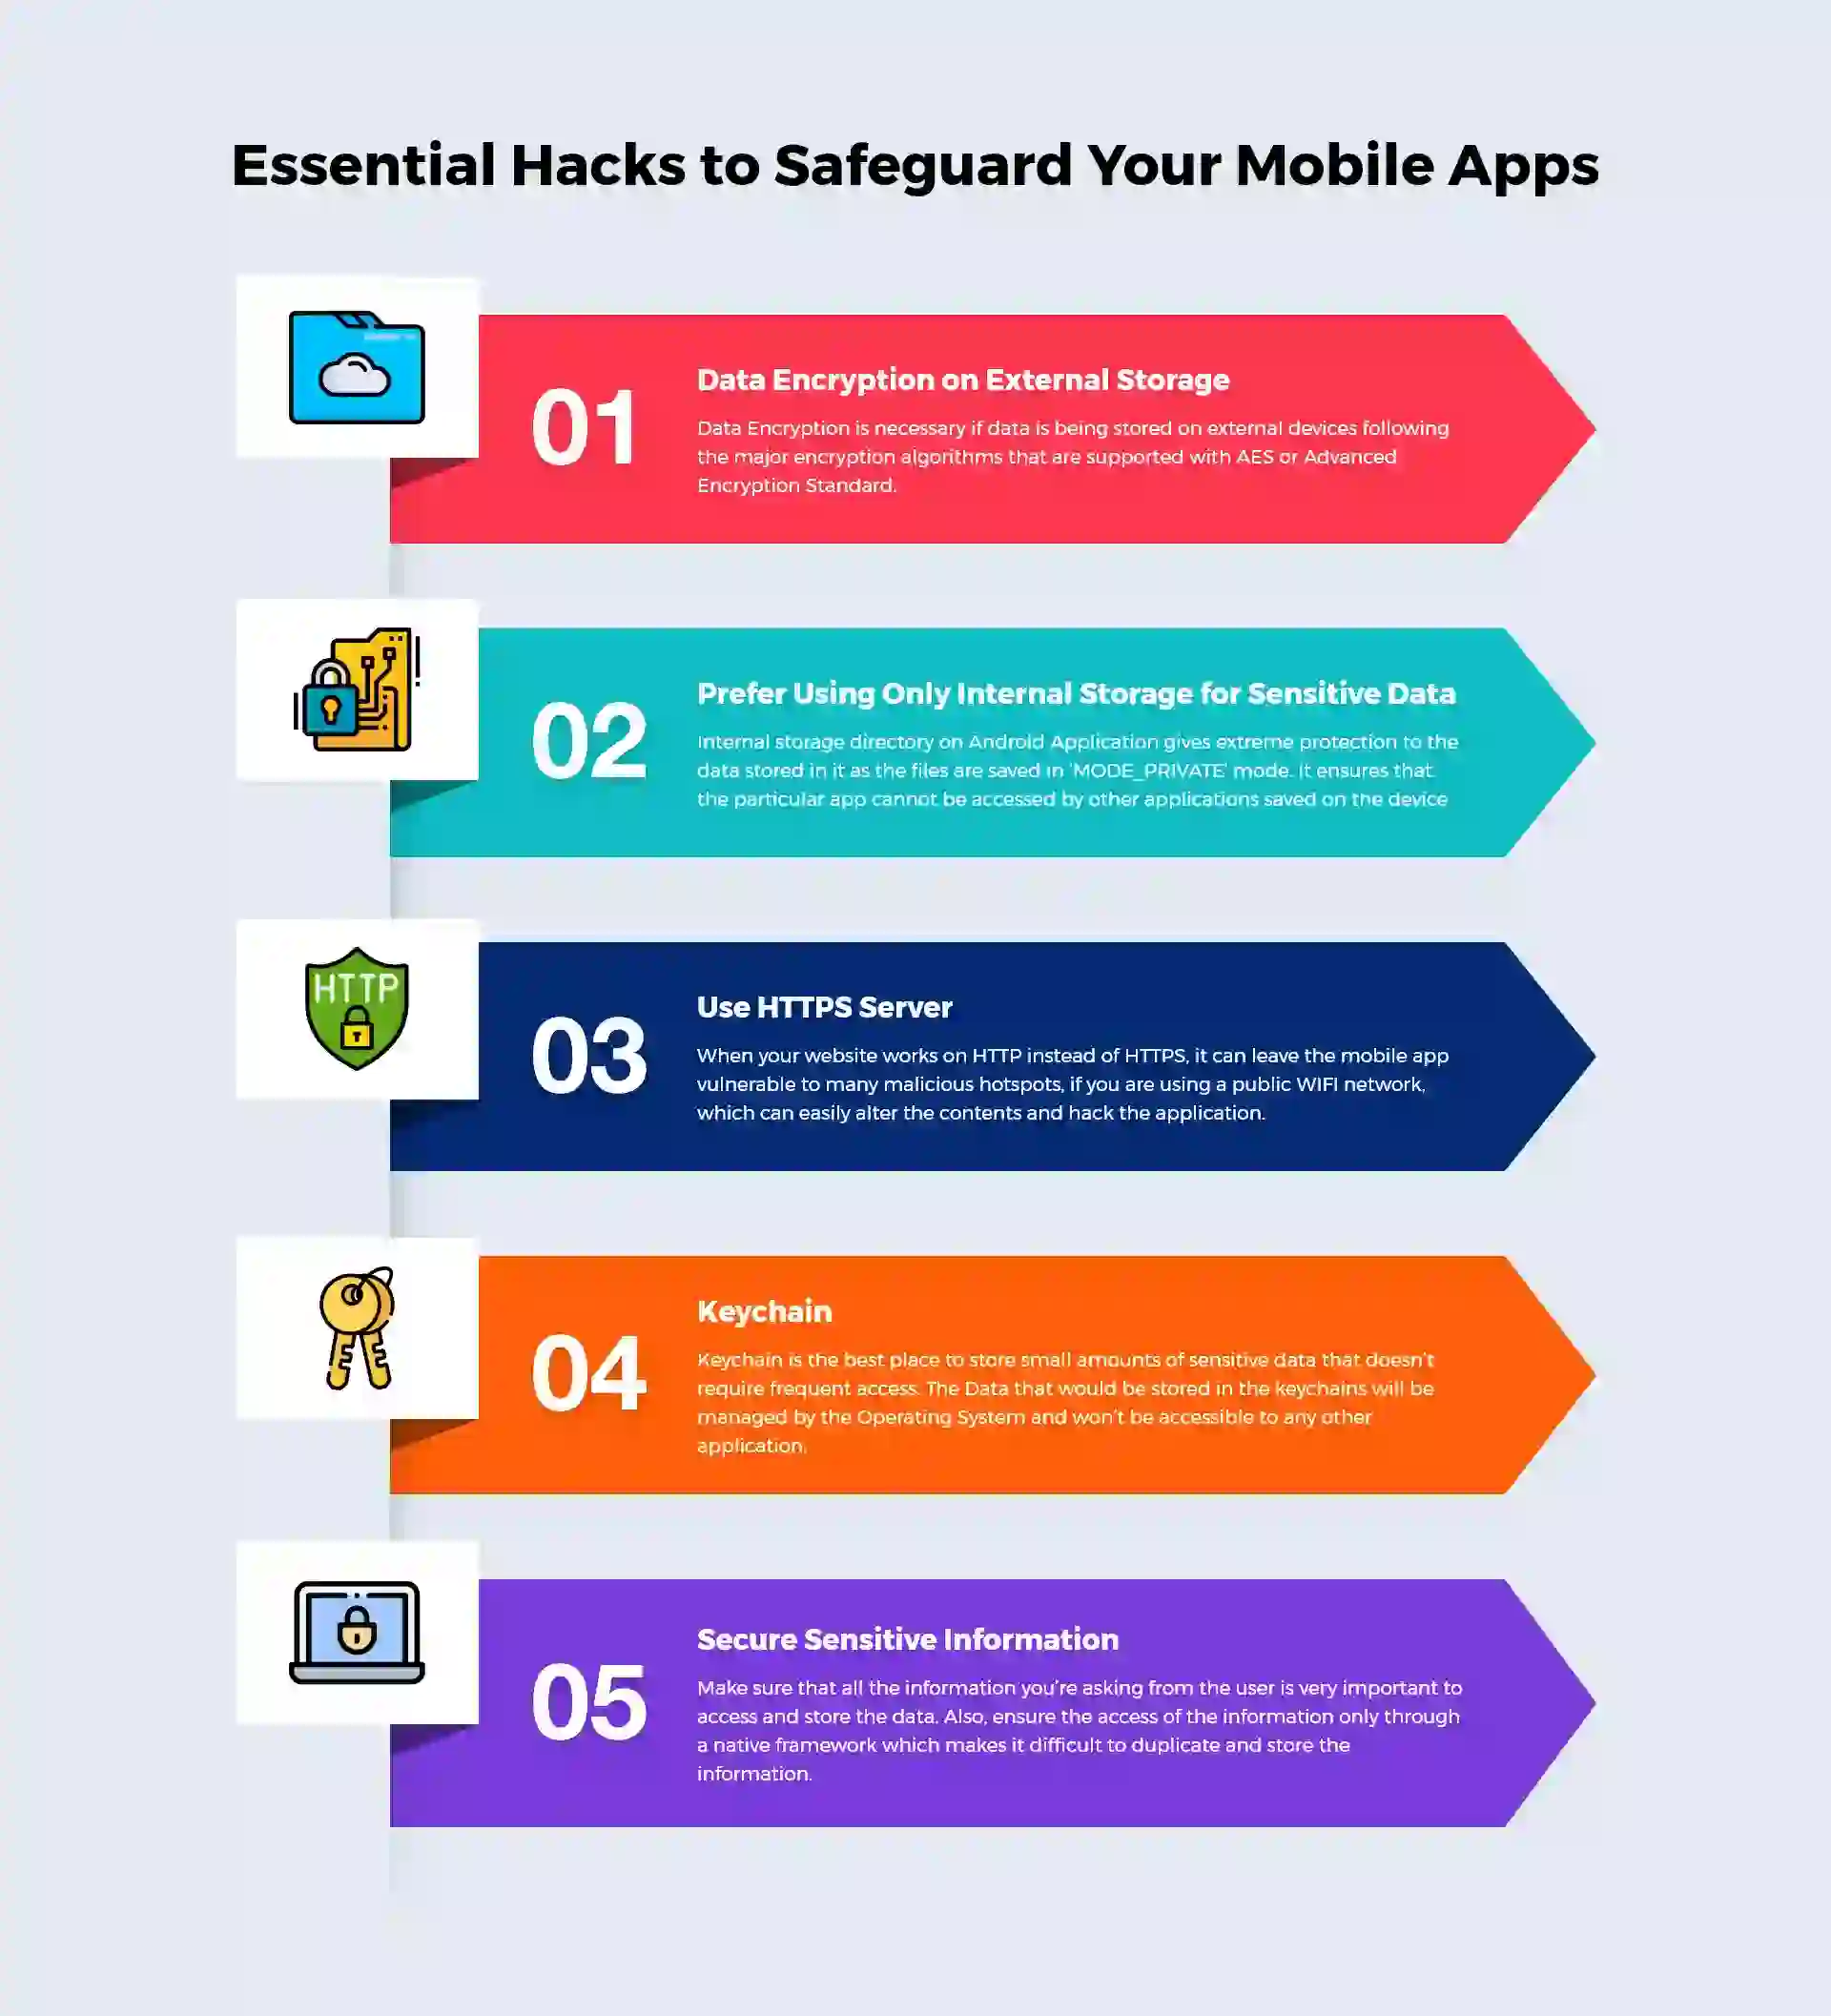 Essential Hacks to Safeguard Your Mobile App